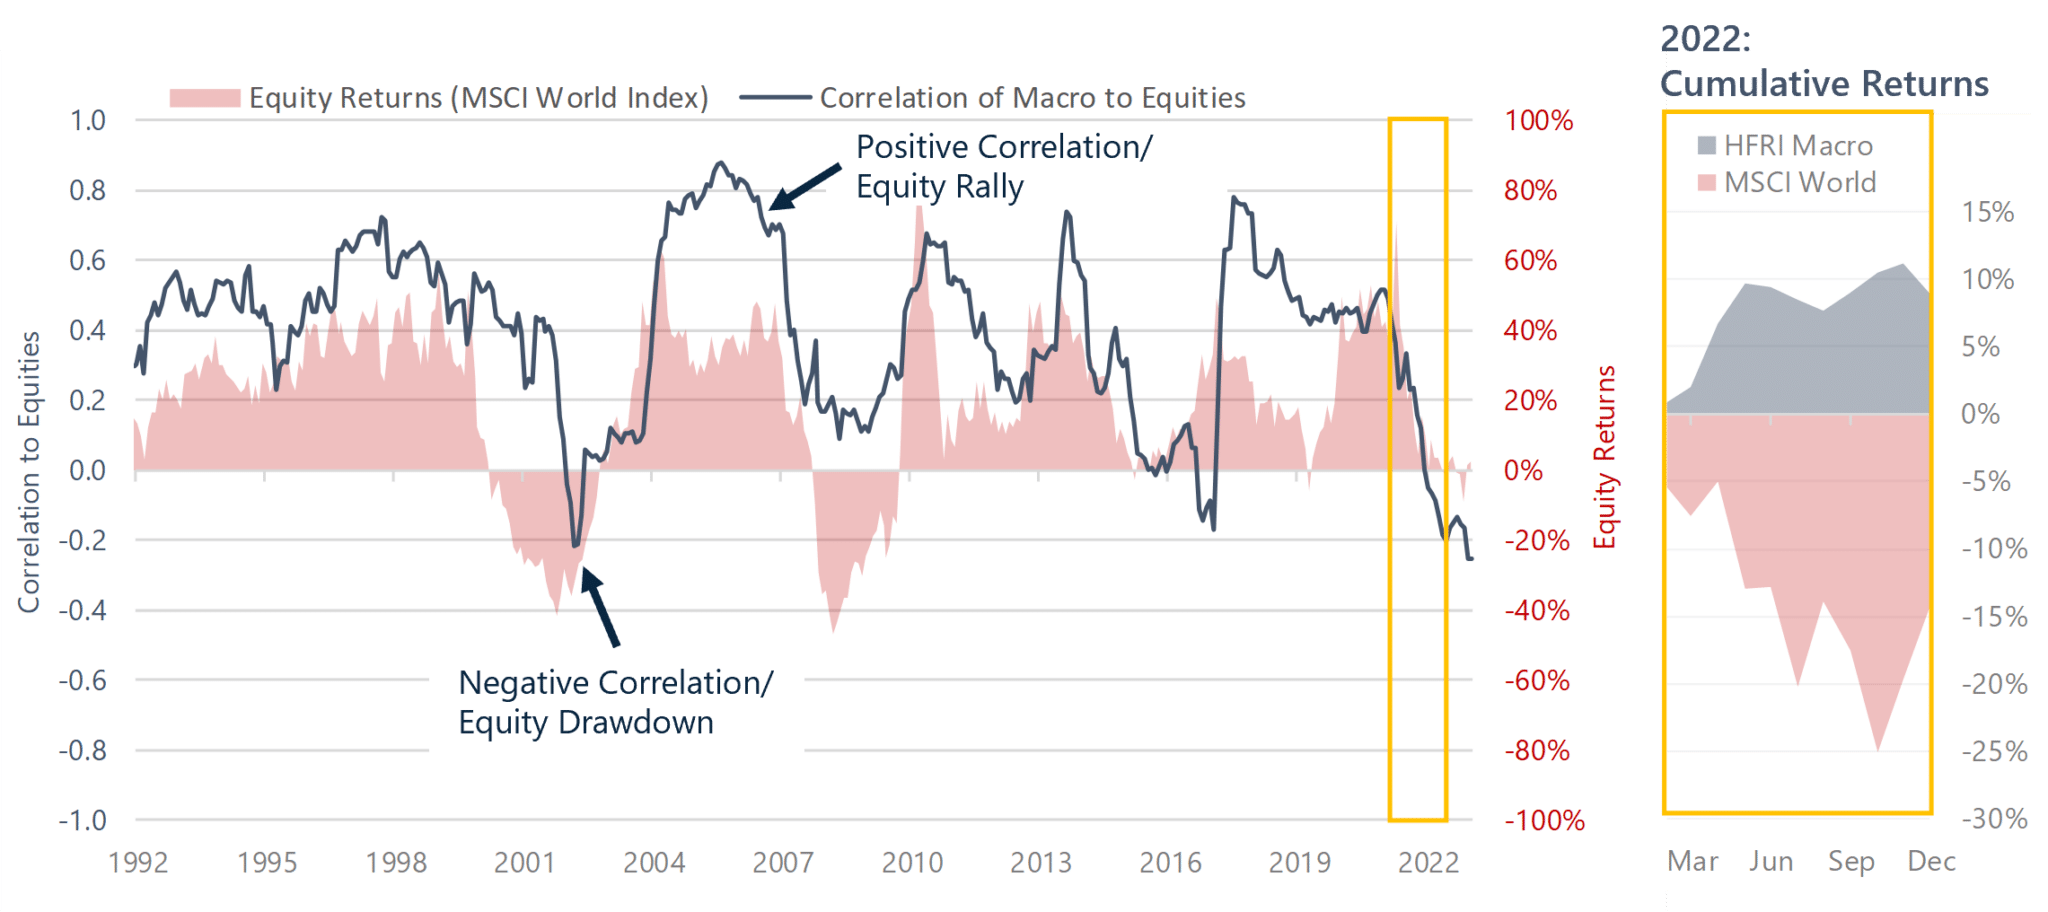 Rolling correlation of Macro to Equities and Equity Returns